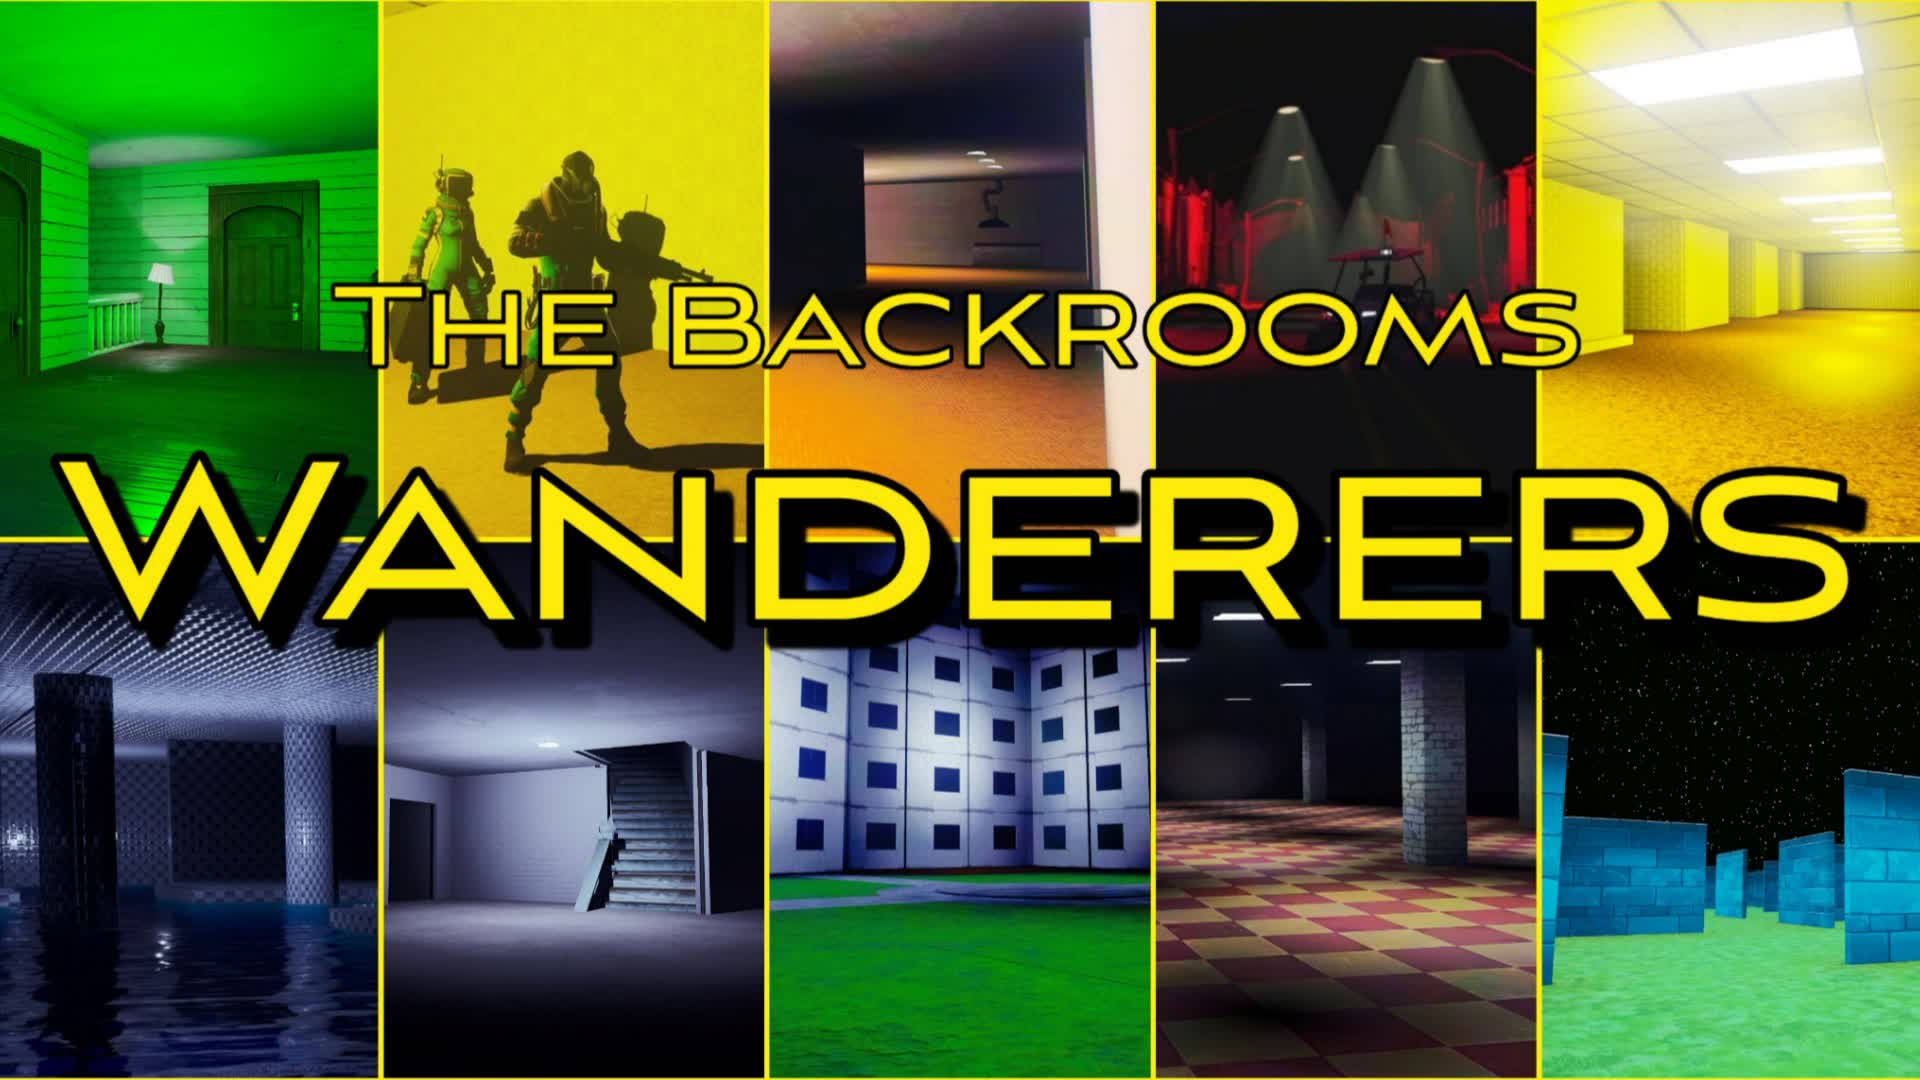 Some The Backrooms Wallpaper I made because it look fun